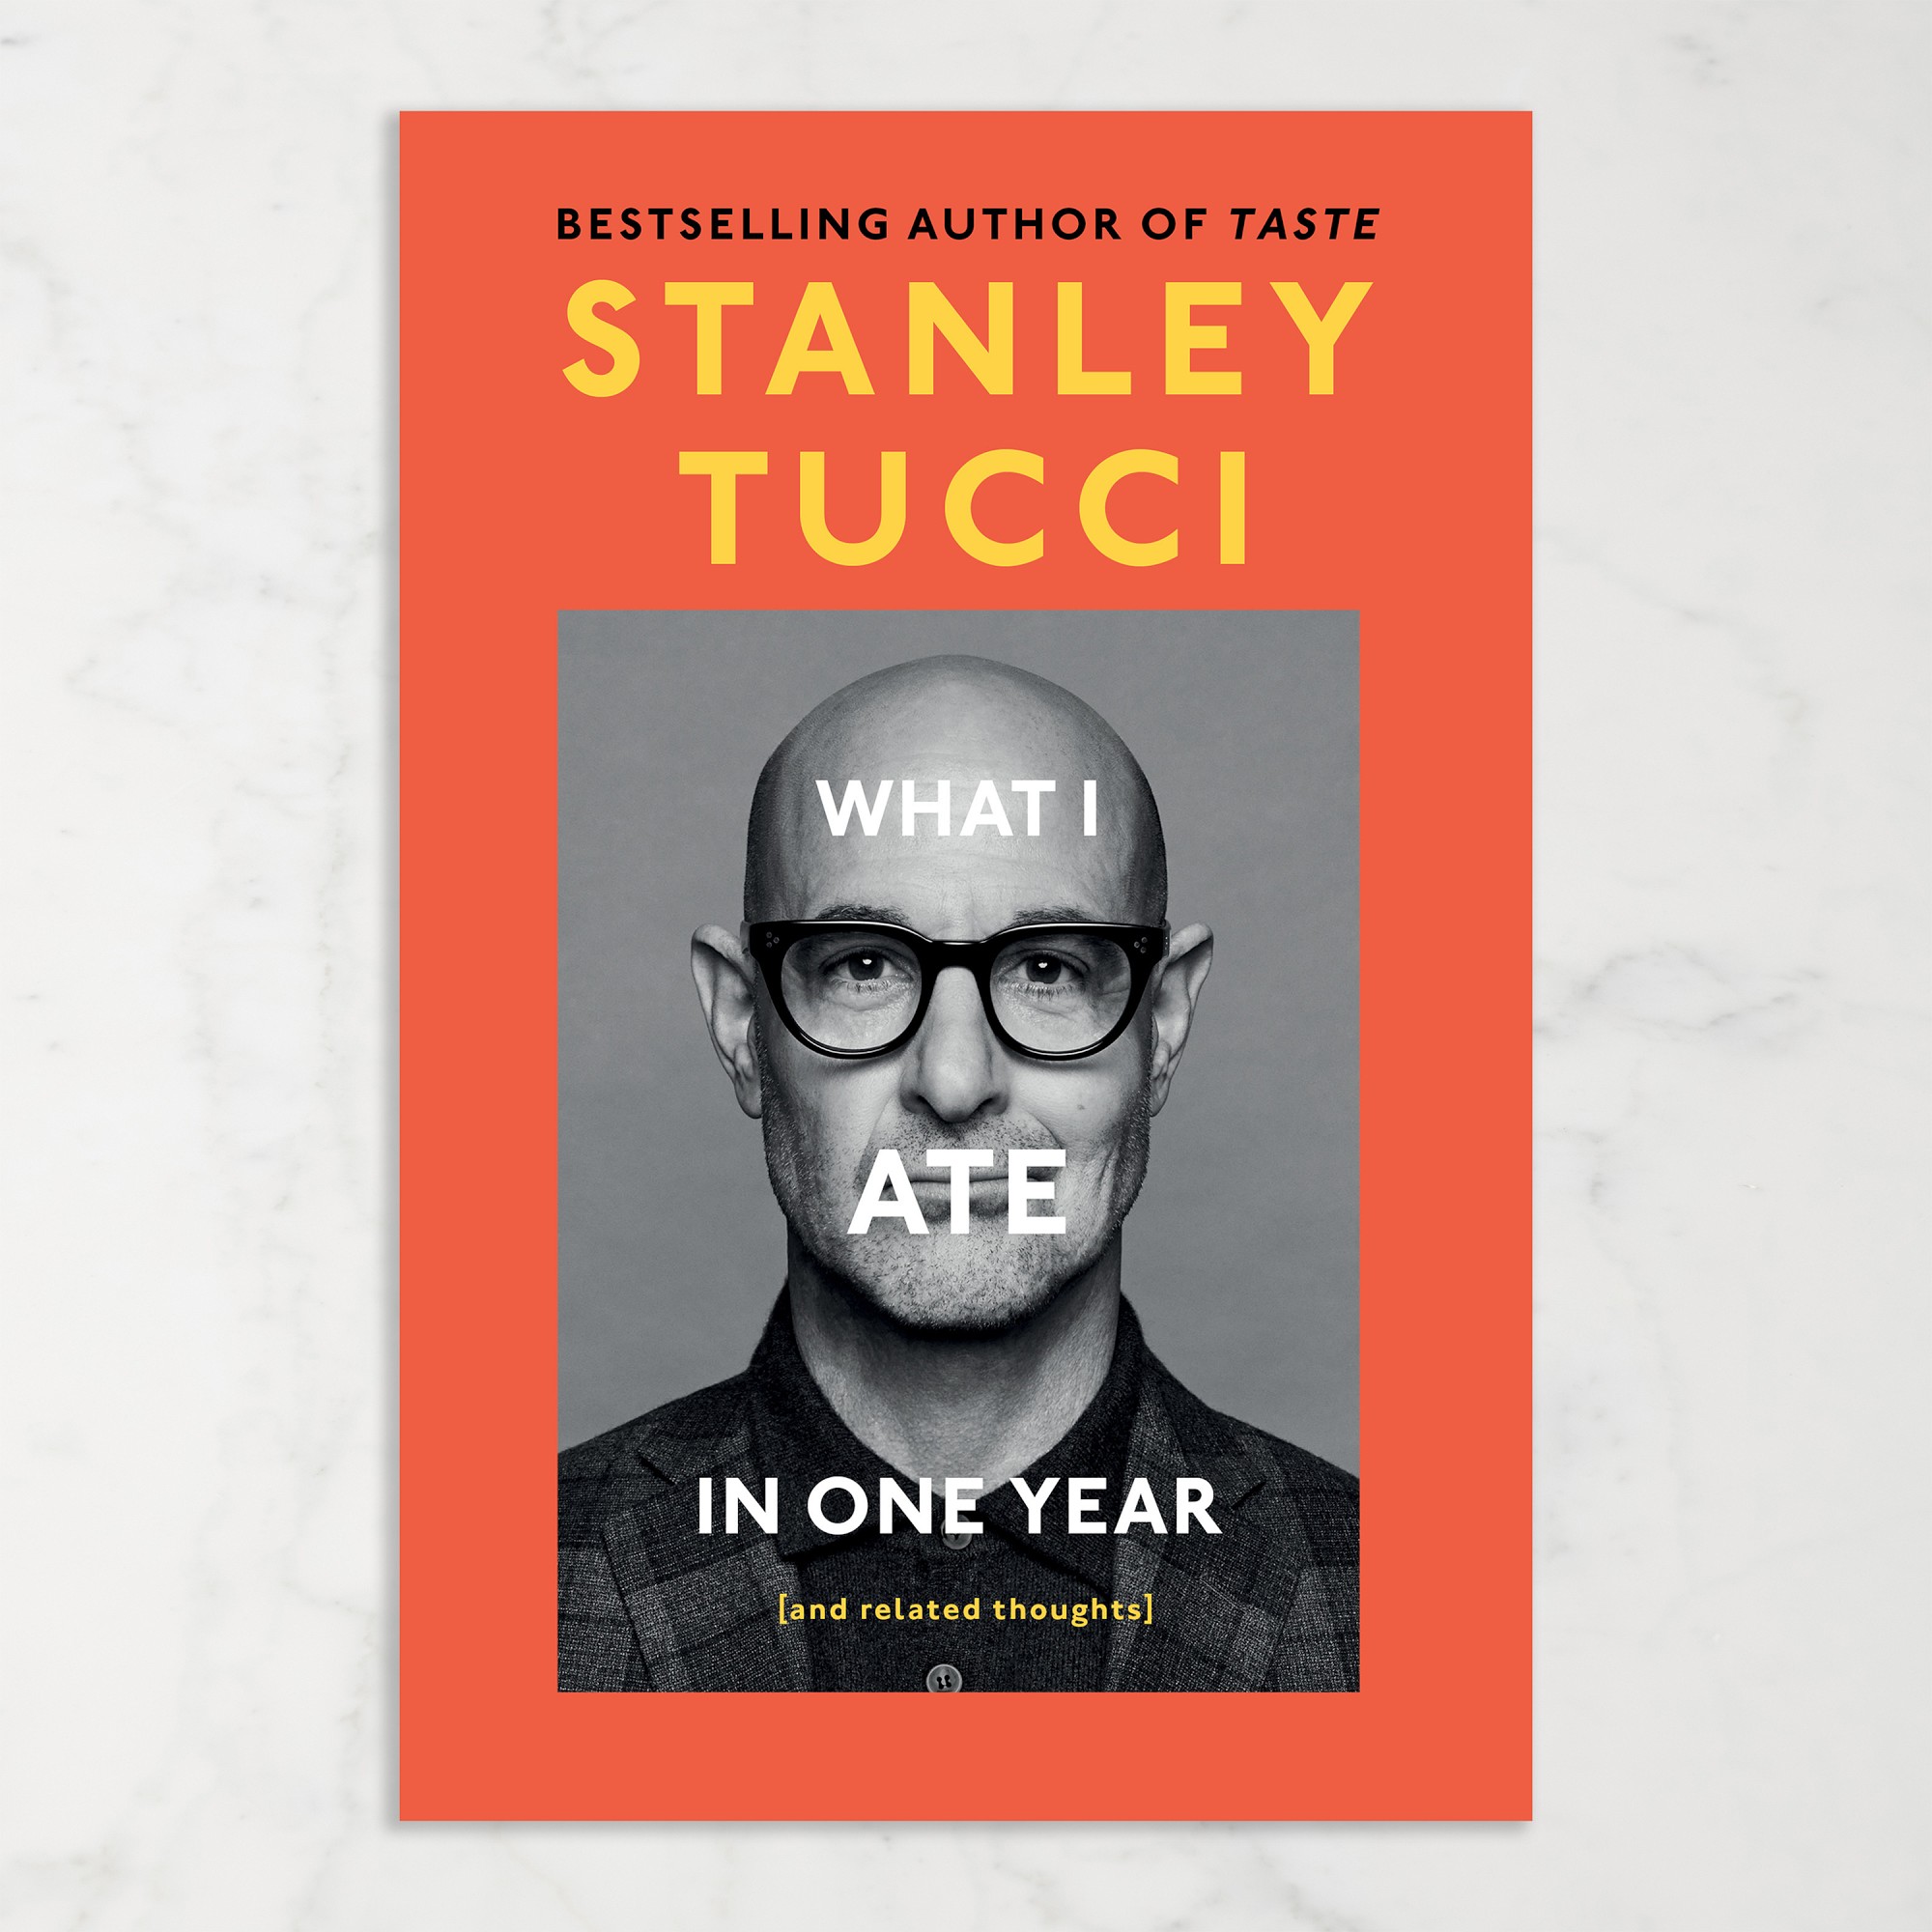 Stanley Tucci: What I Ate in One Year